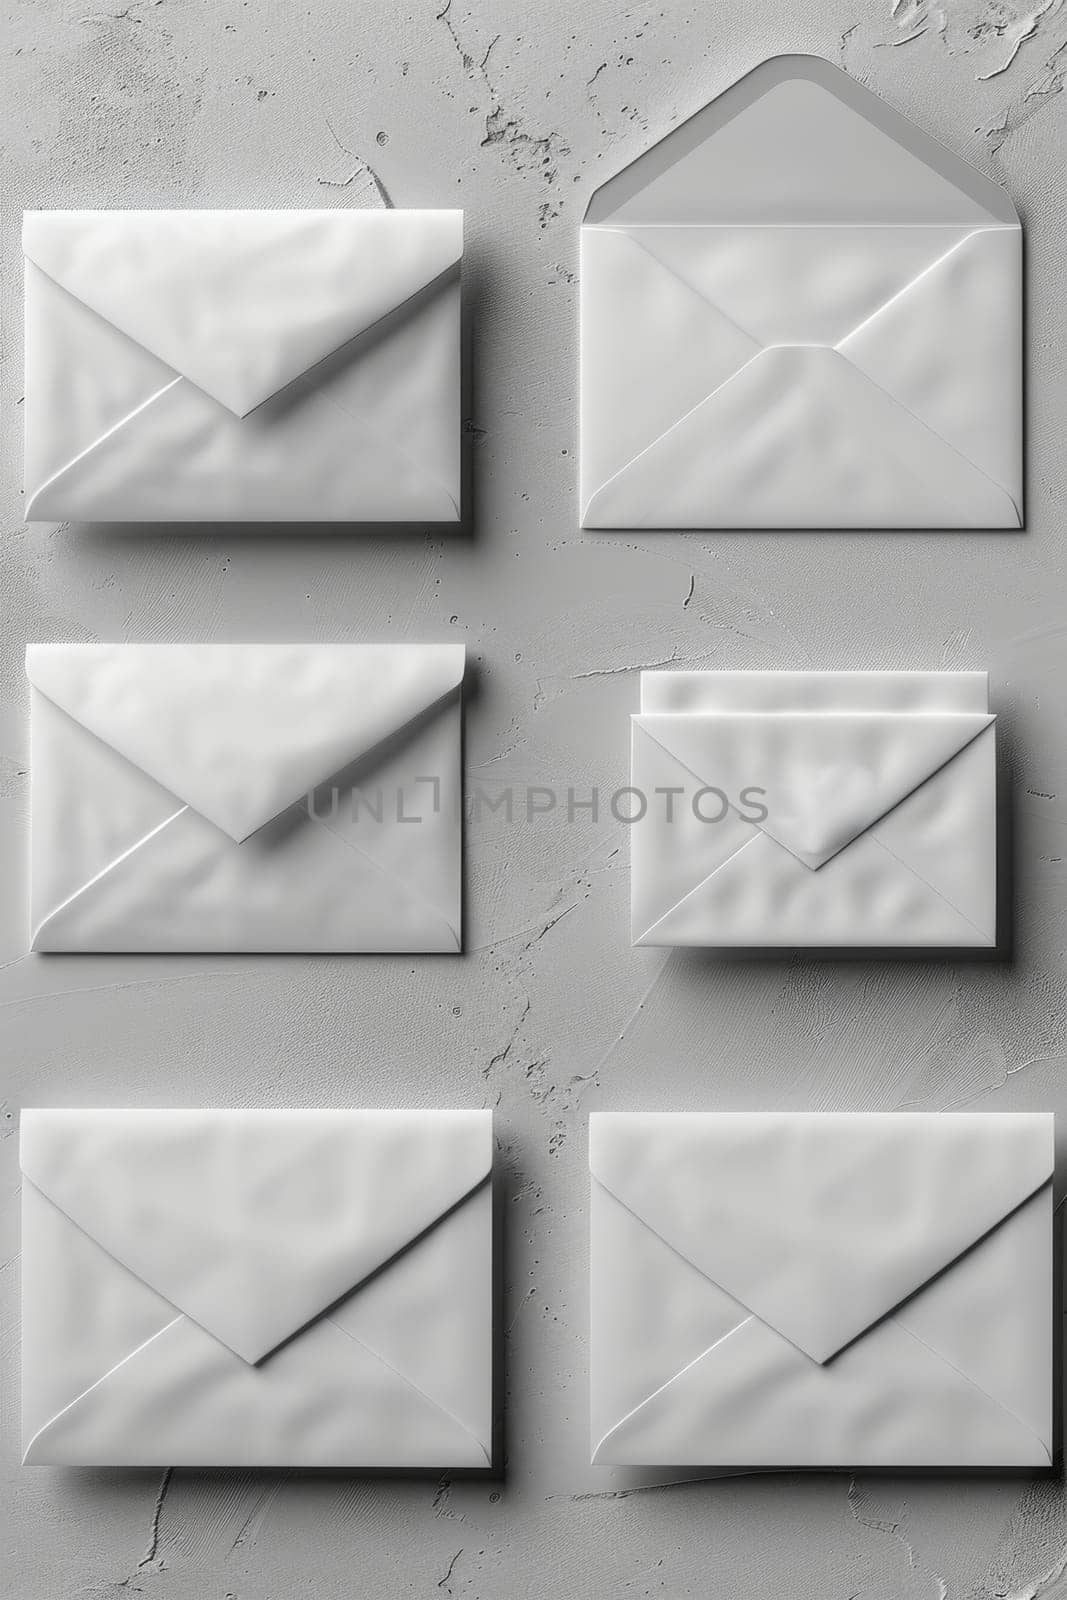 A set of white postal envelopes on a light background by Lobachad